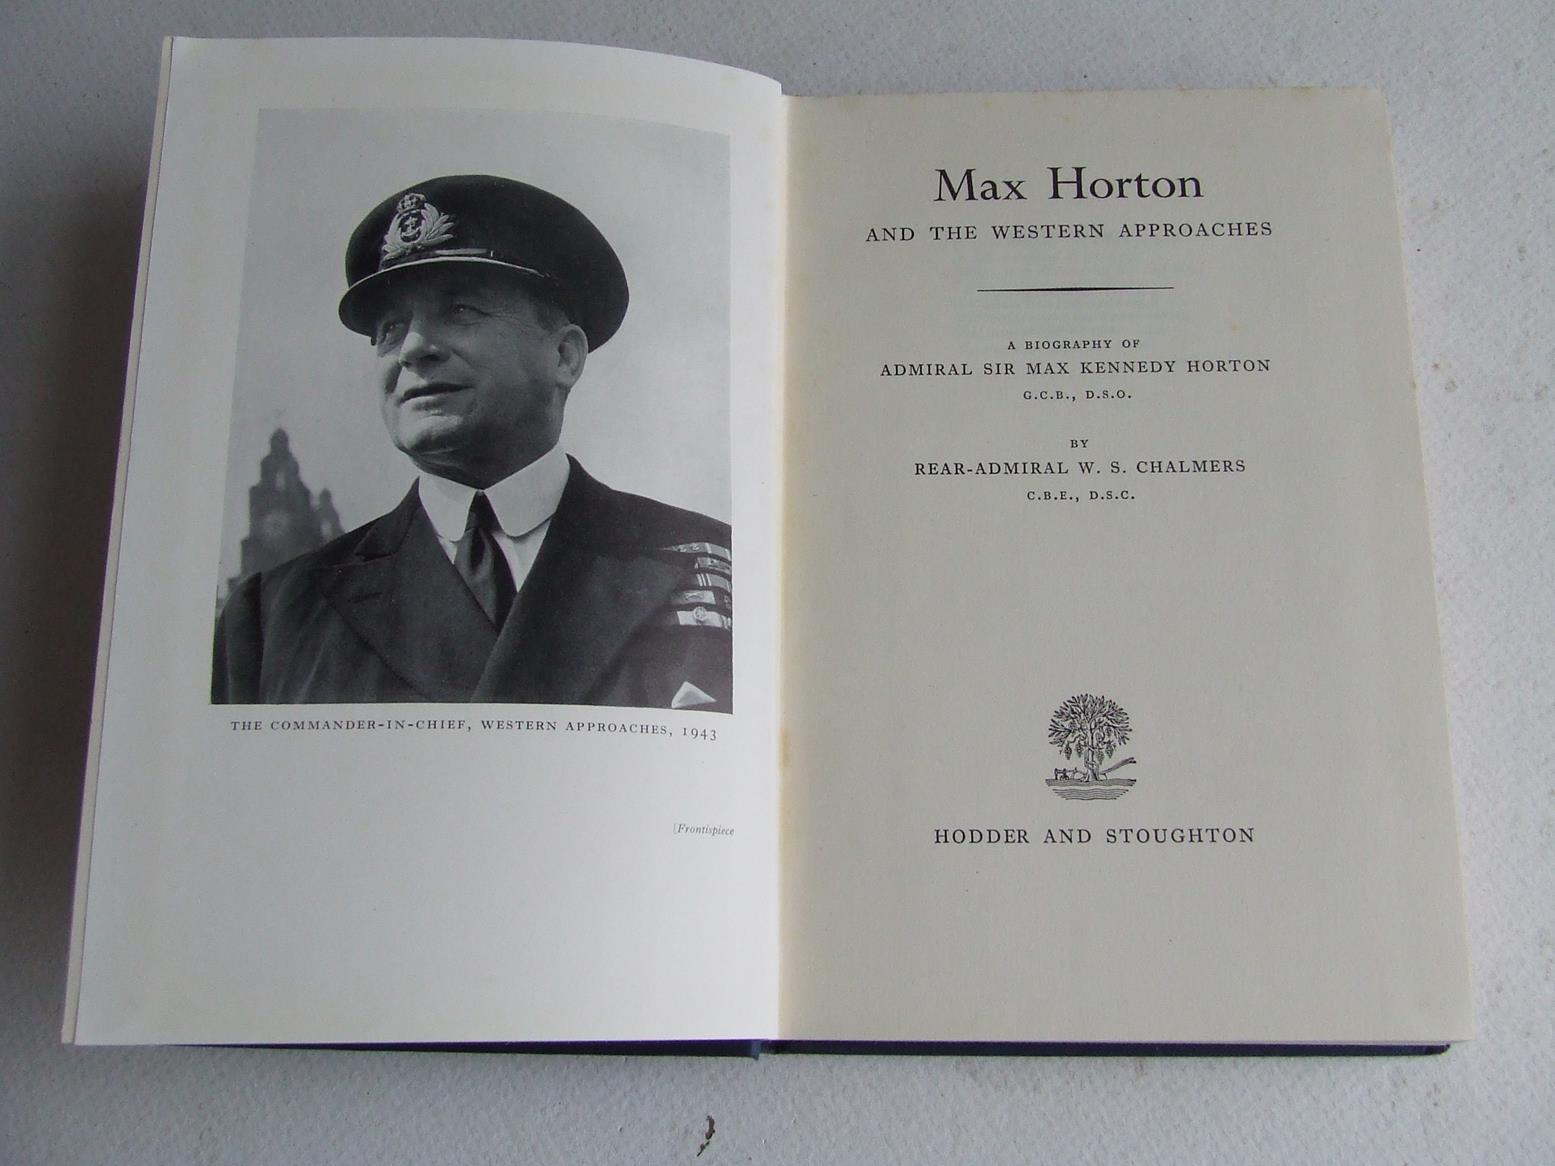 Max Horton and the Western Approaches